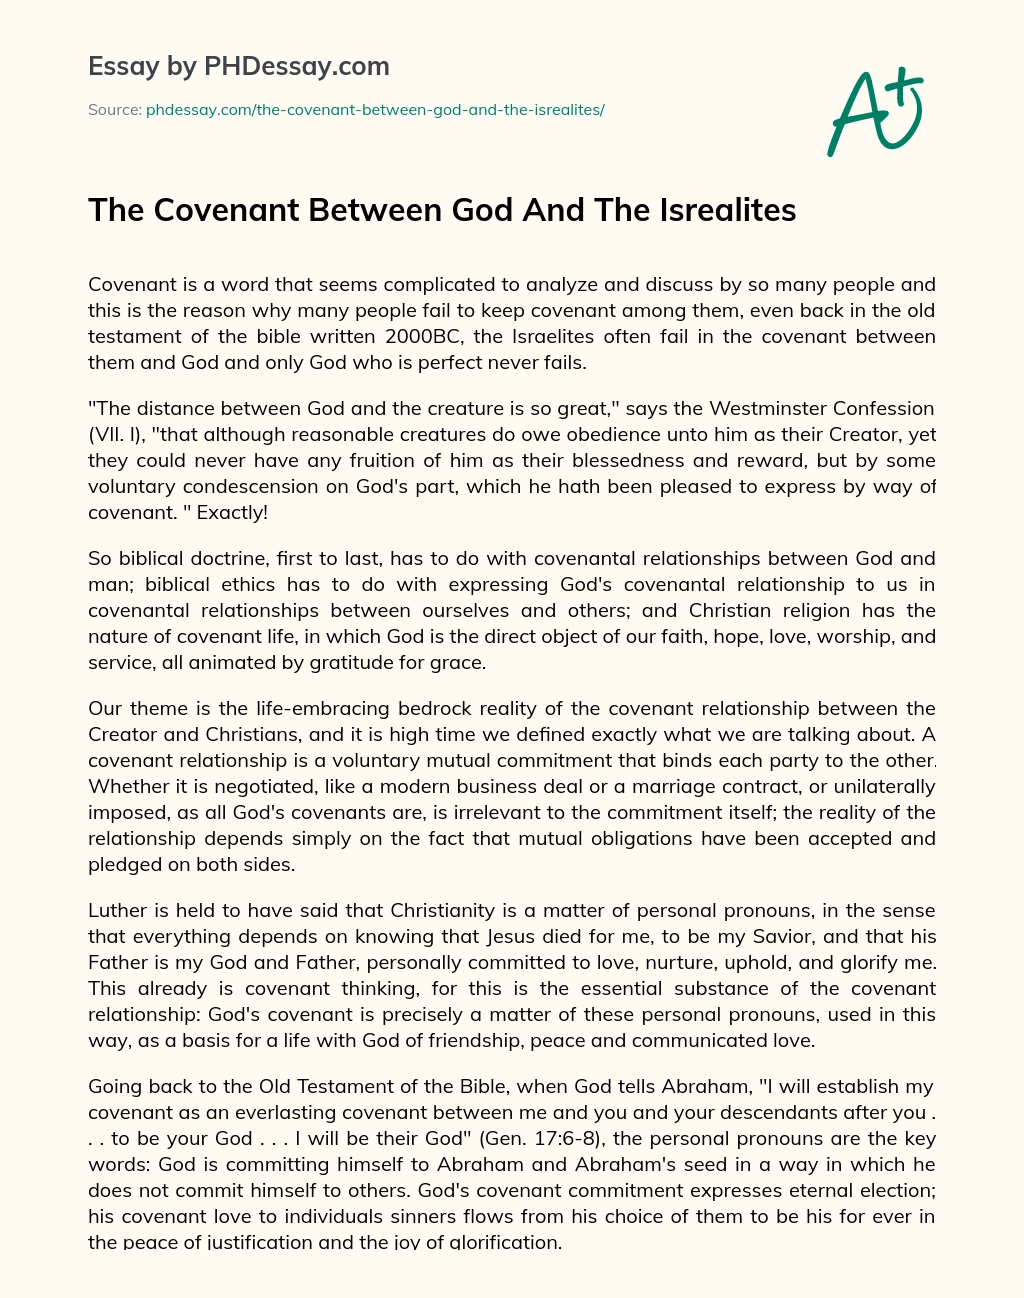 The Covenant Between God And The Isrealites essay